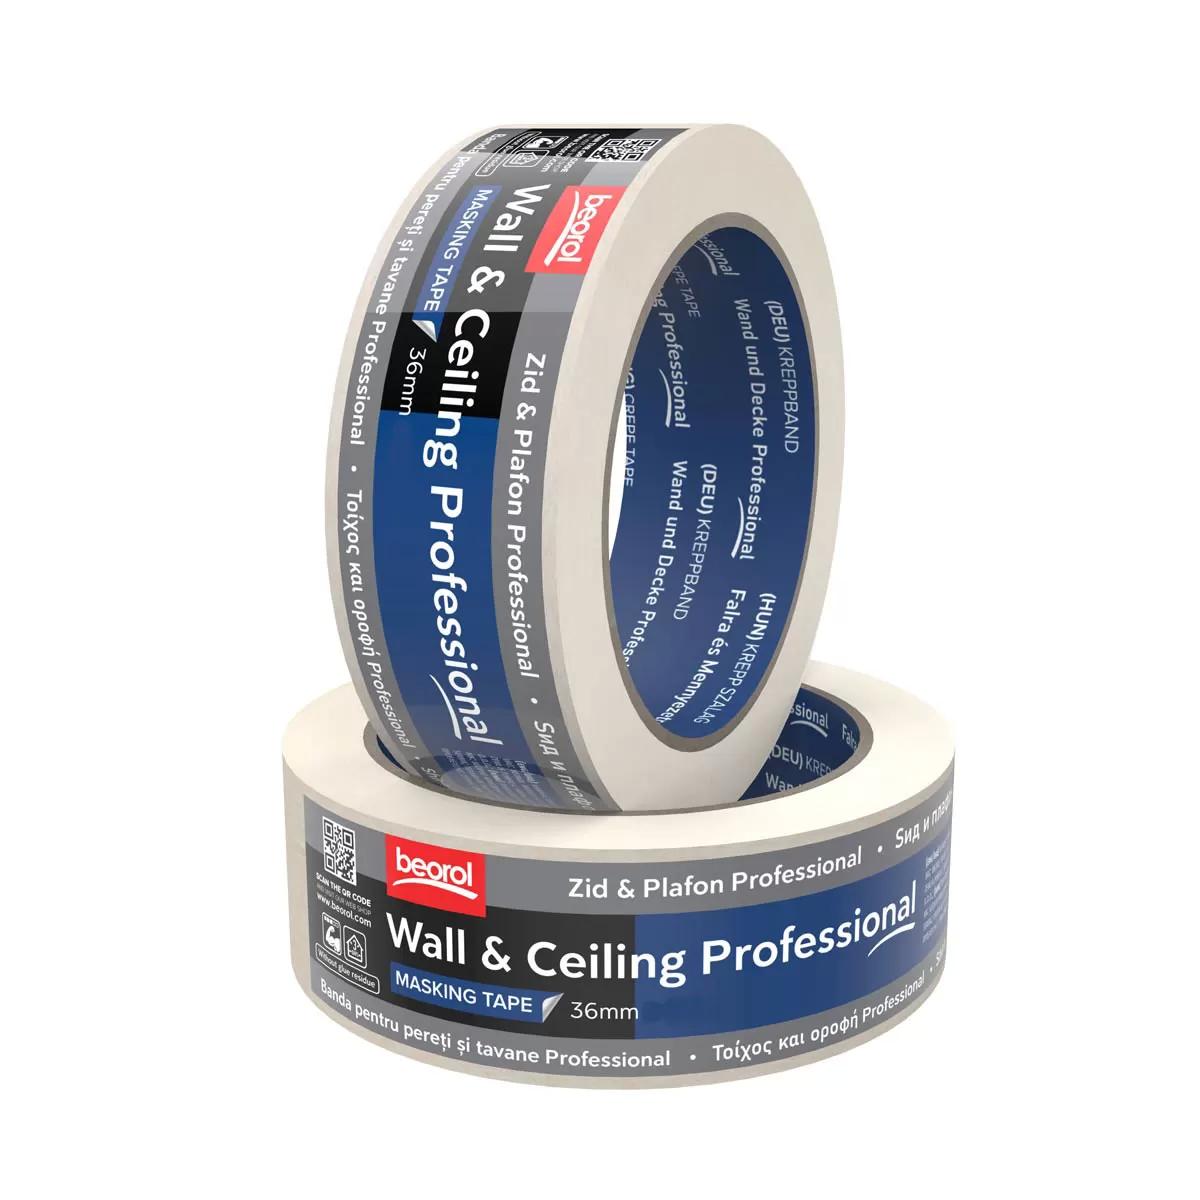 Masking tape Indoor Professional, 36mm x 50m, 70ᵒC 